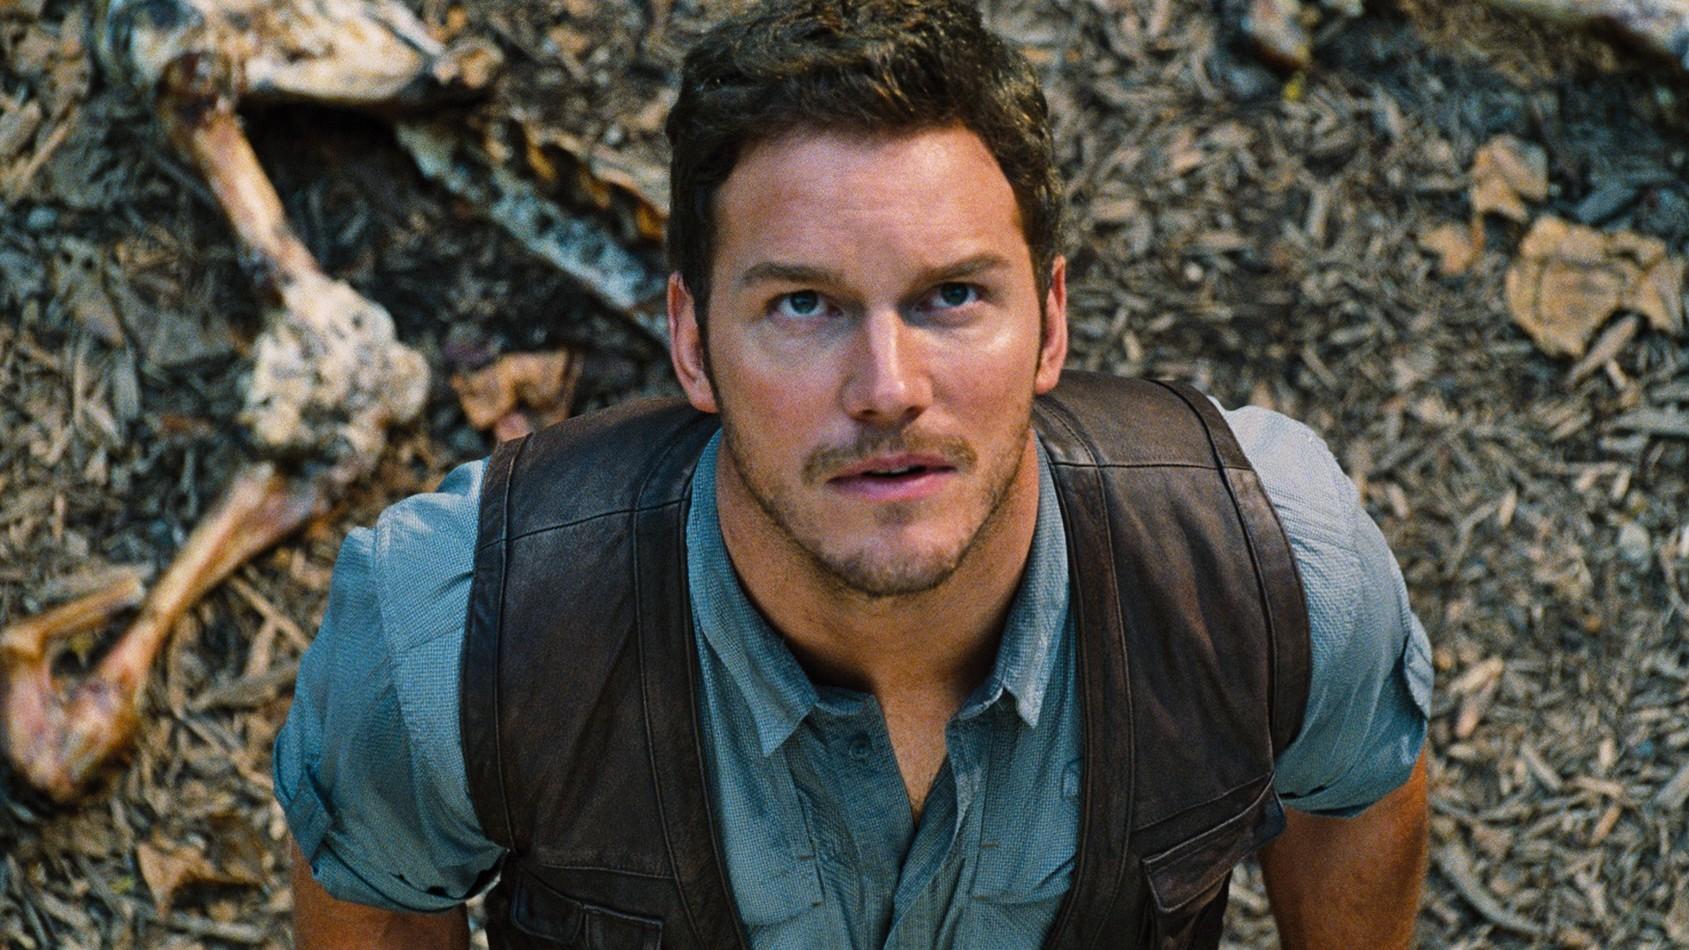 When Will You Meet Your Soulmate? ❤️ Rate a Bunch of Male Celebrities to Find Out Chris Pratt